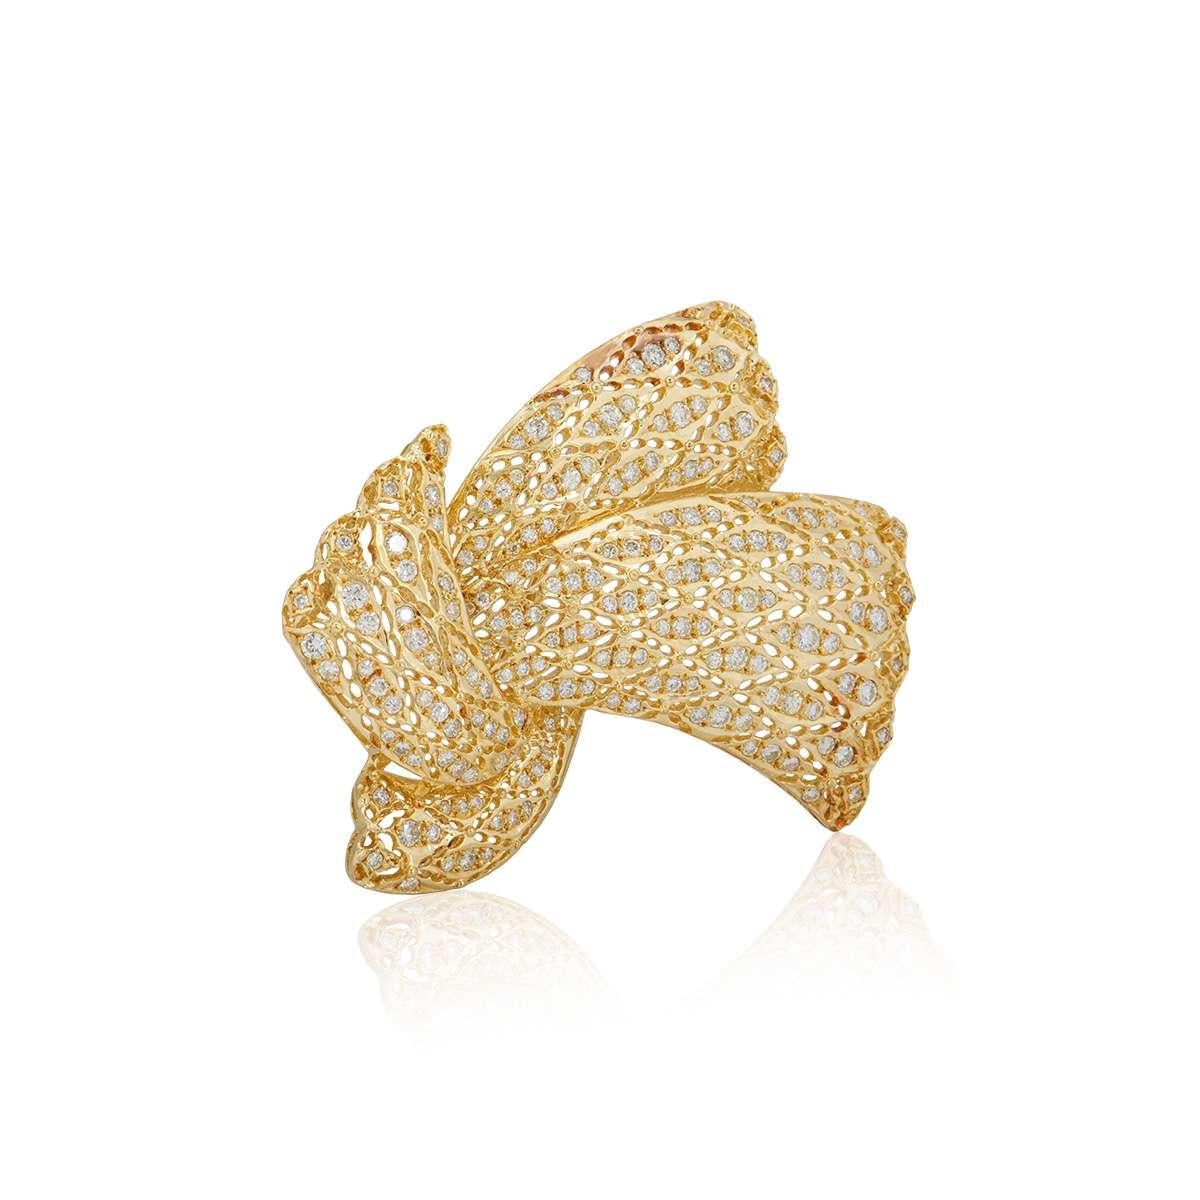 An 18k yellow gold diamond Bow brooch. The brooch is set with round brilliant cut diamonds, totalling approximately 2.71ct. The brooch measures 4.5cm in width and 5cm in length and has a pin closure to the reverse. The brooch has a gross weight of